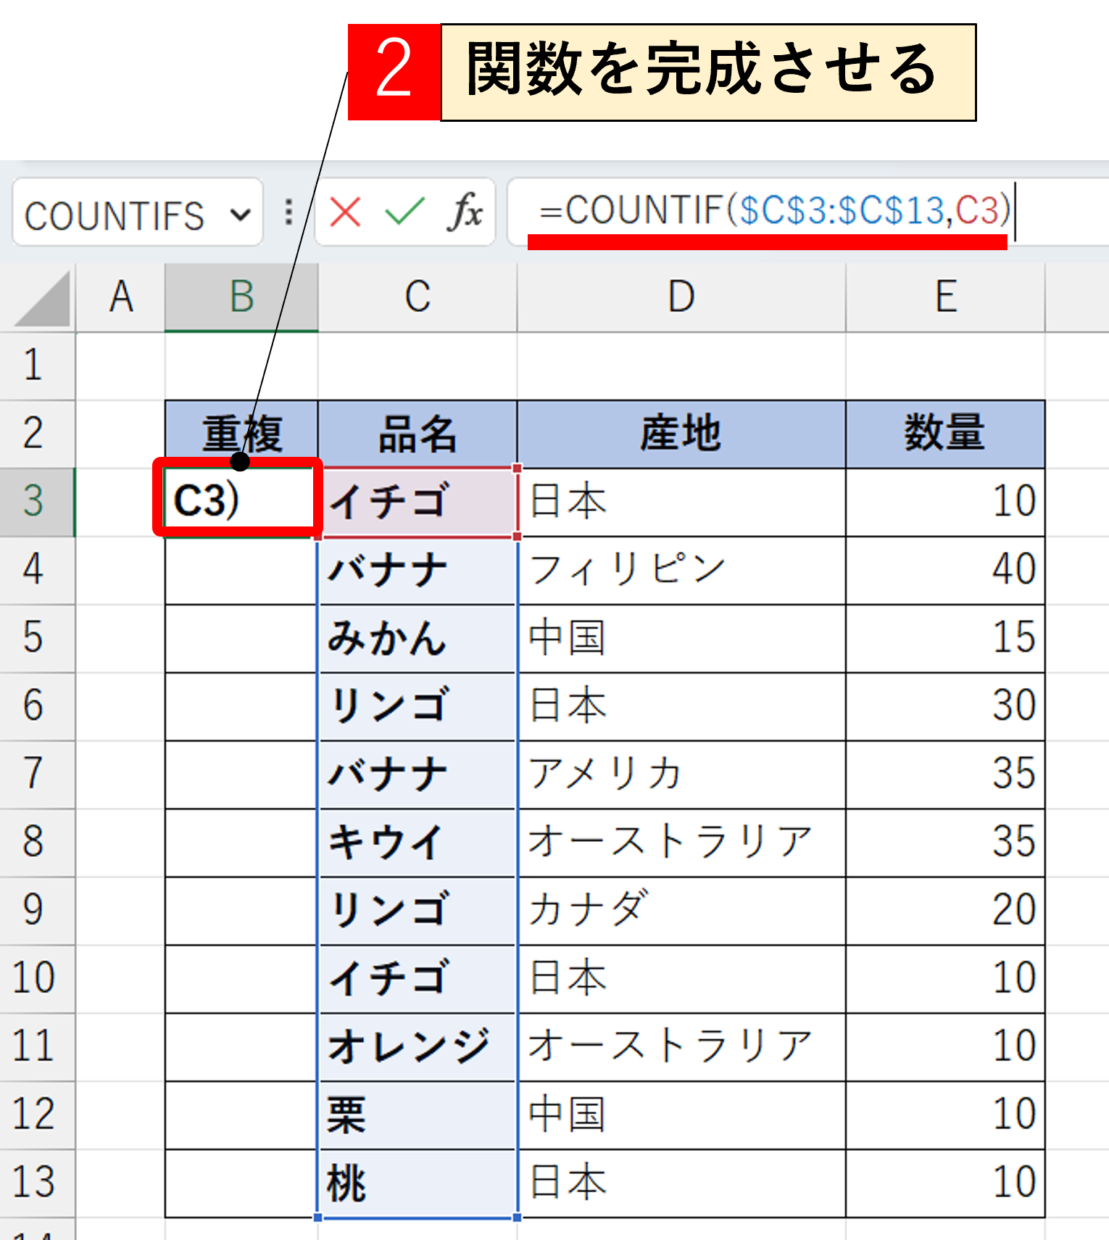 COUNTIF関数を完成させる